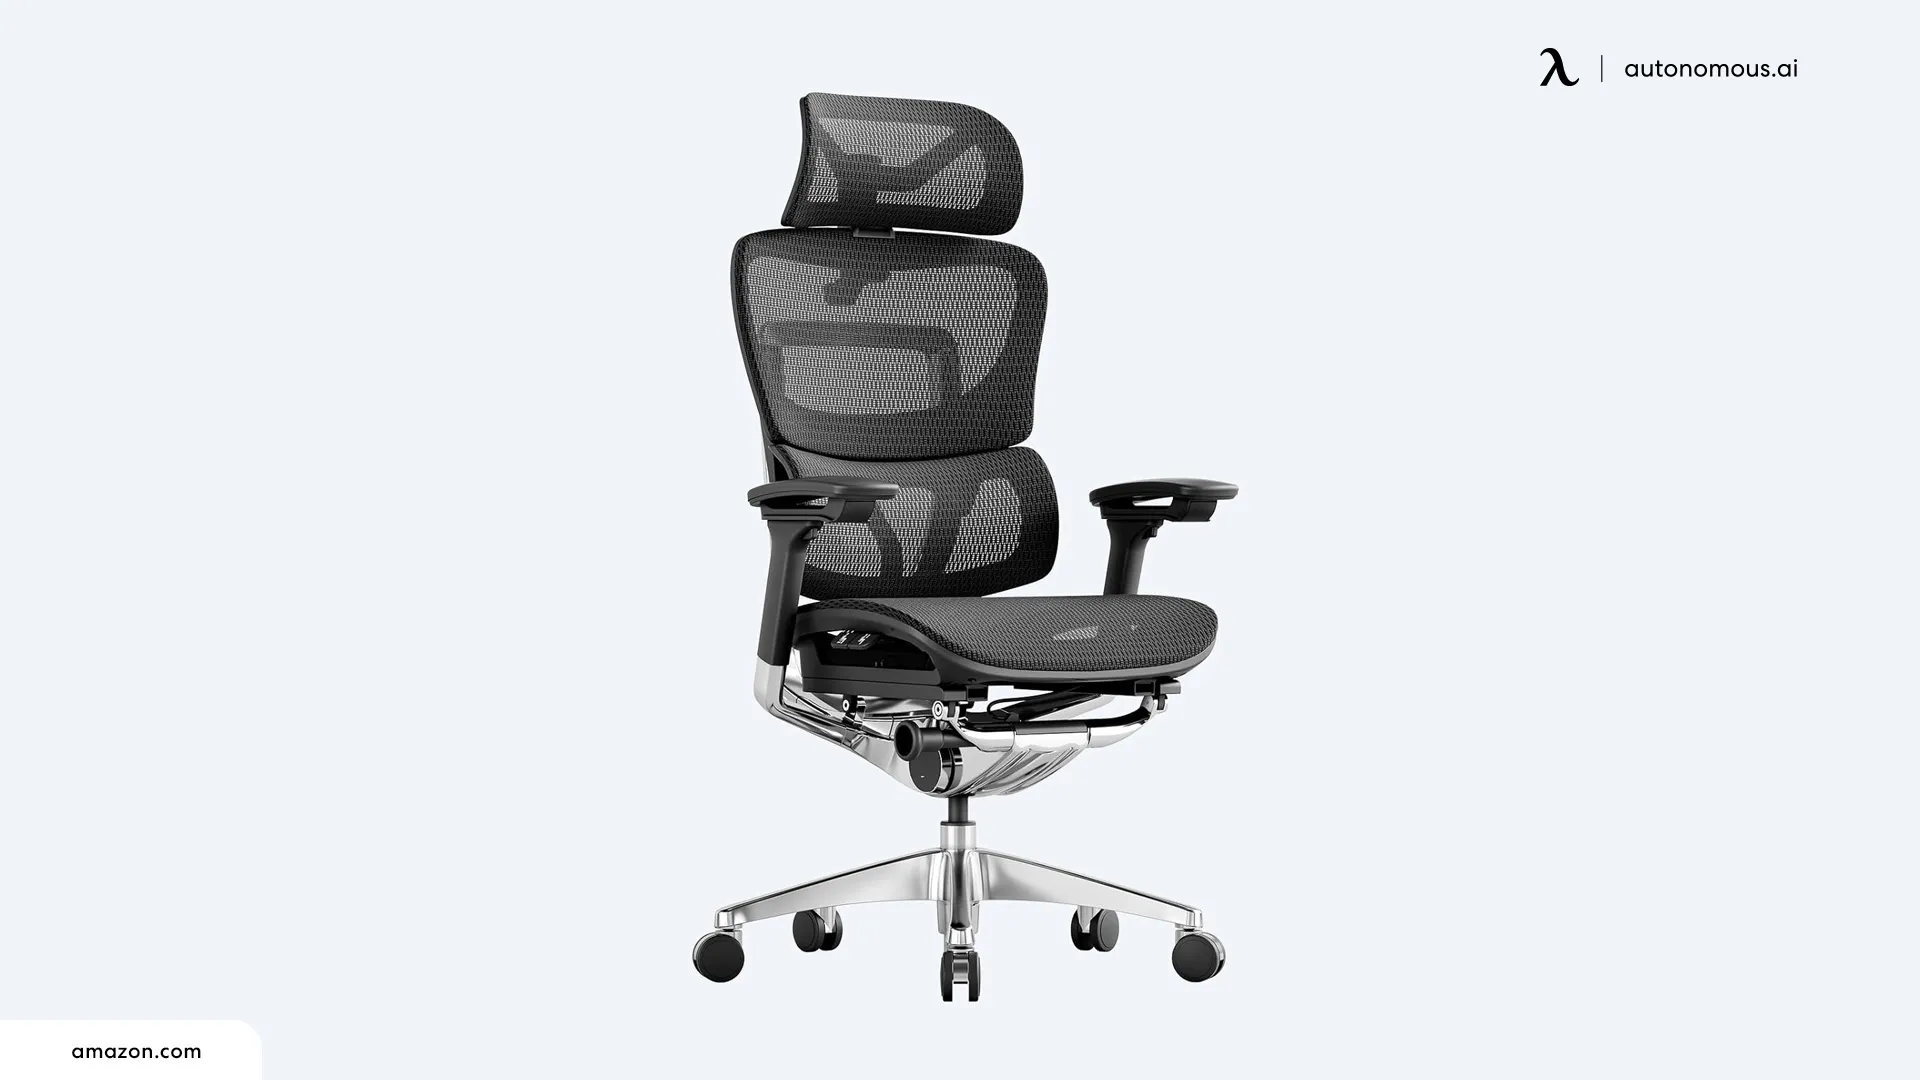 Odinlake Big & Tall Office Chair